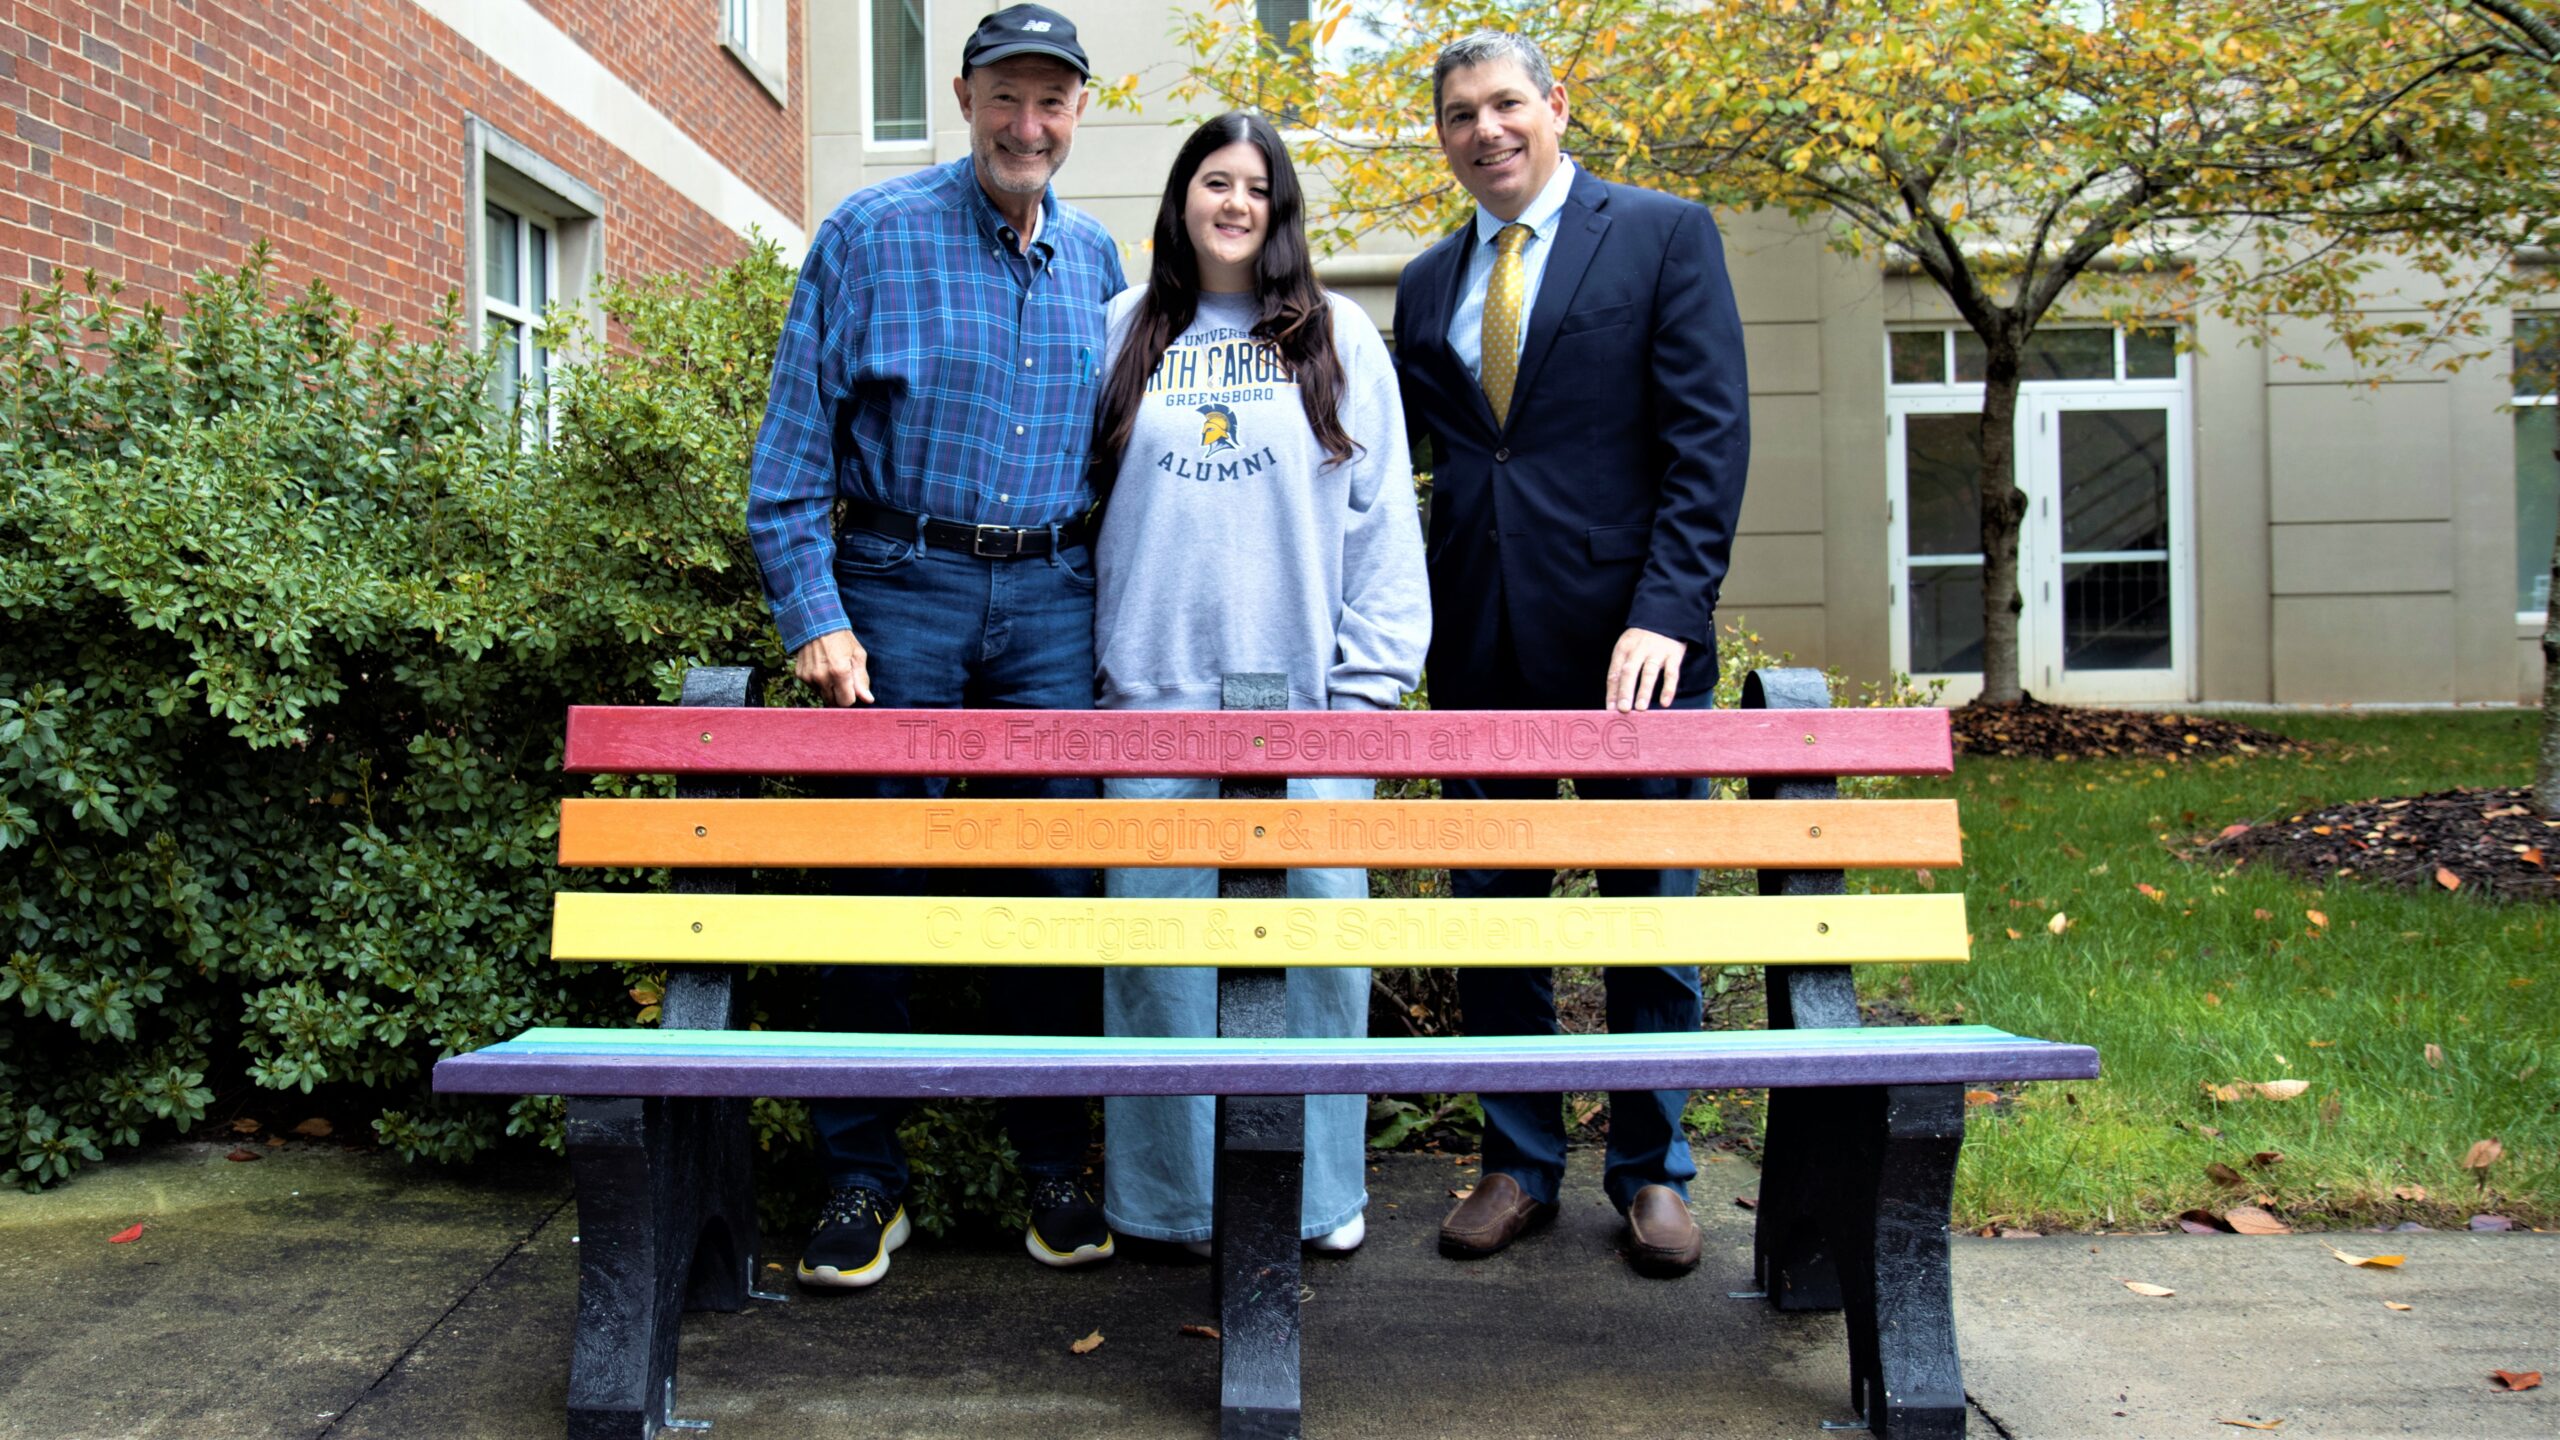 New Bench Aims to Spark Conversation, Inclusion